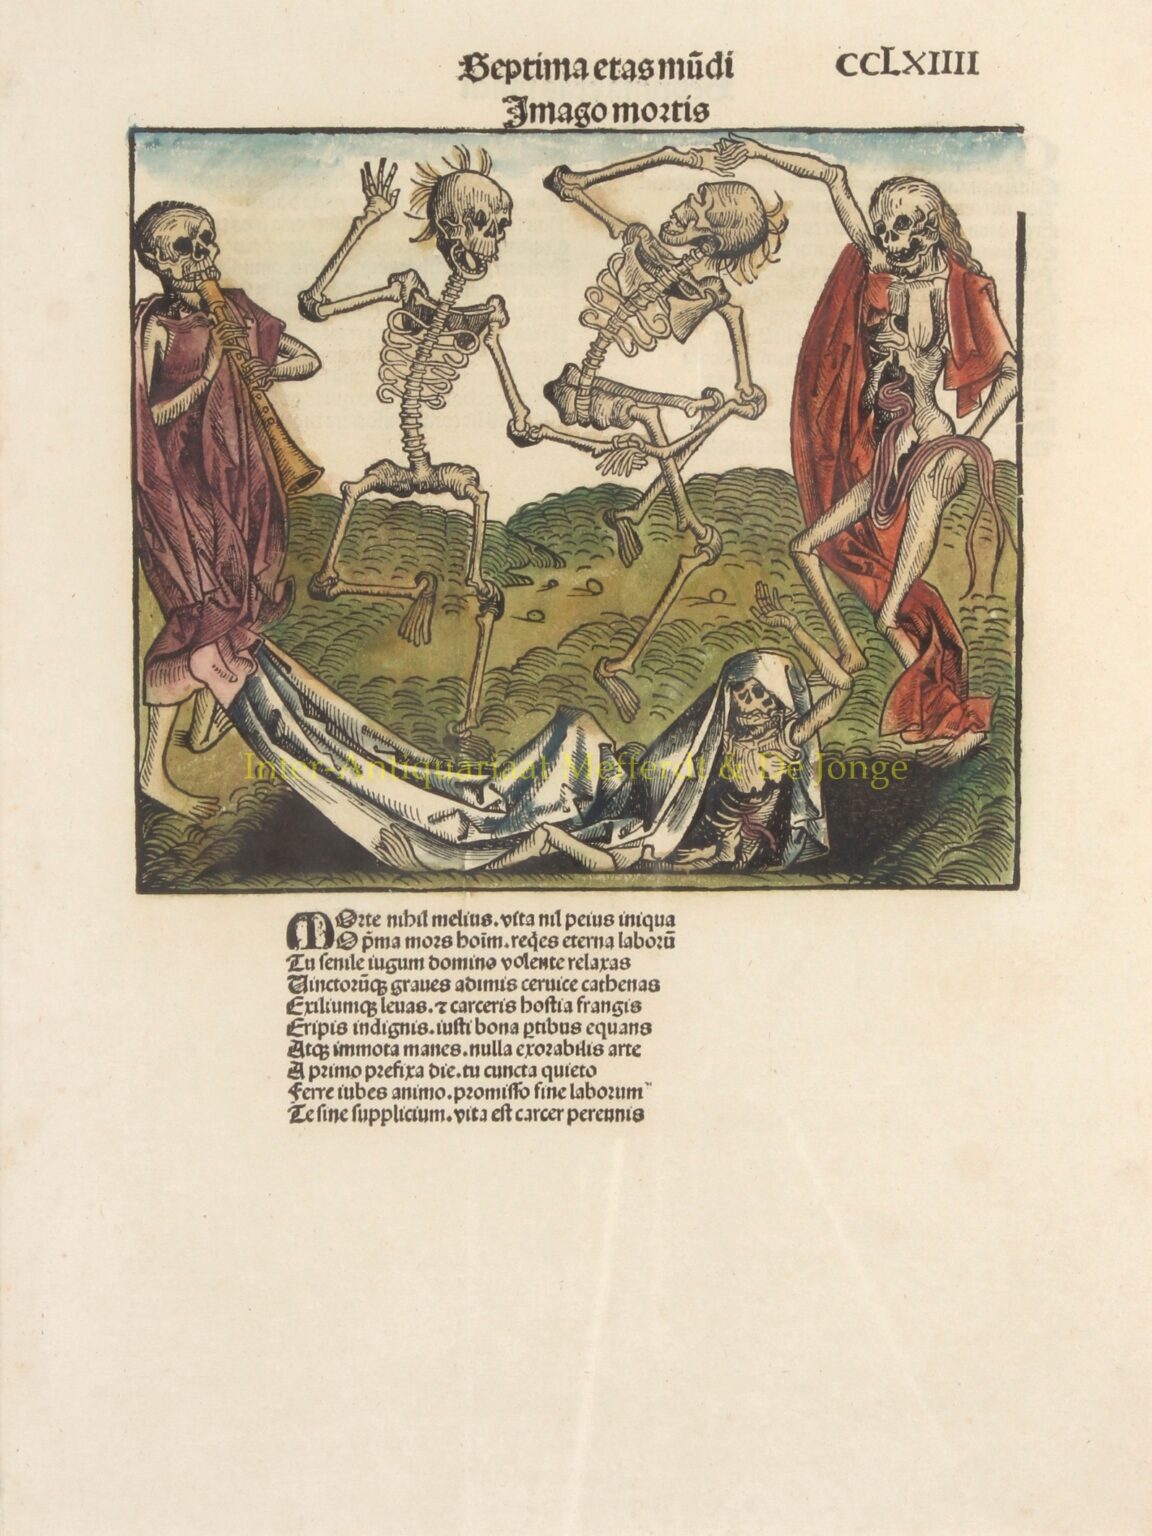 dance of skeletons death antique woodcut print 15th century|dance of ...